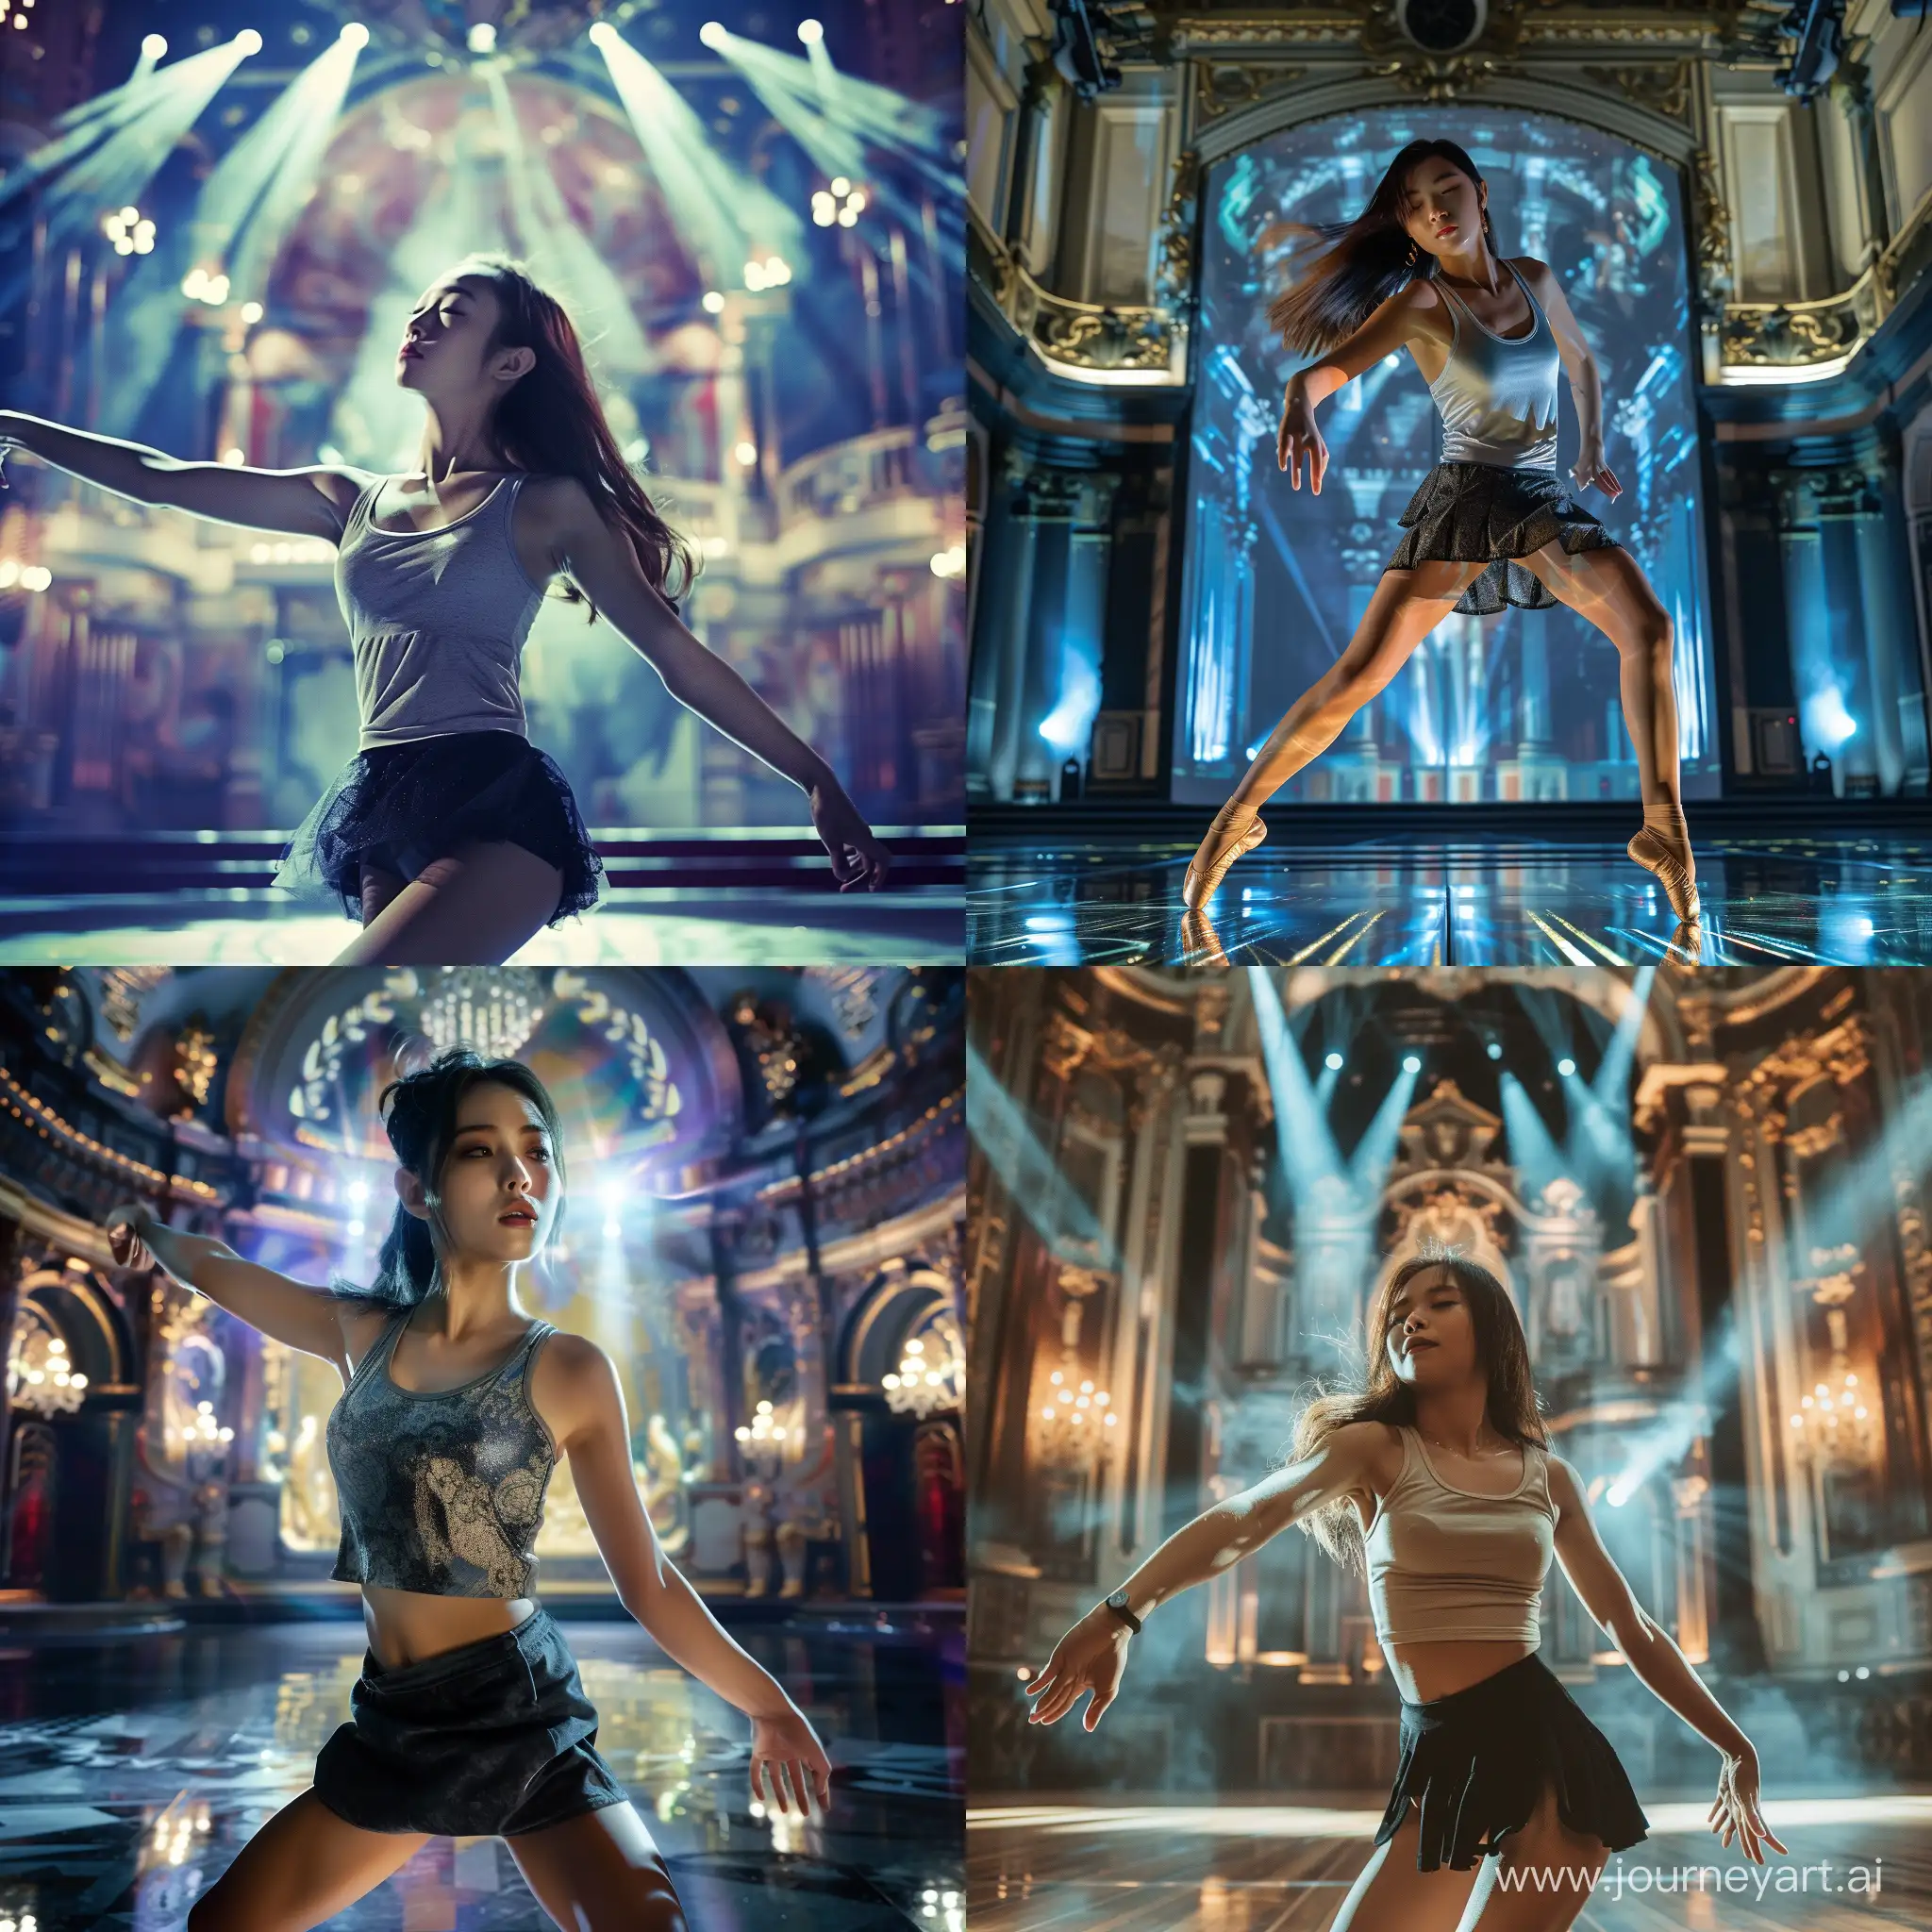 A high shuttle speed photo of an Asia girl doing modern dance. She is wearing tank top and mini skirt.  The background is a grand stage with fancy lighting 